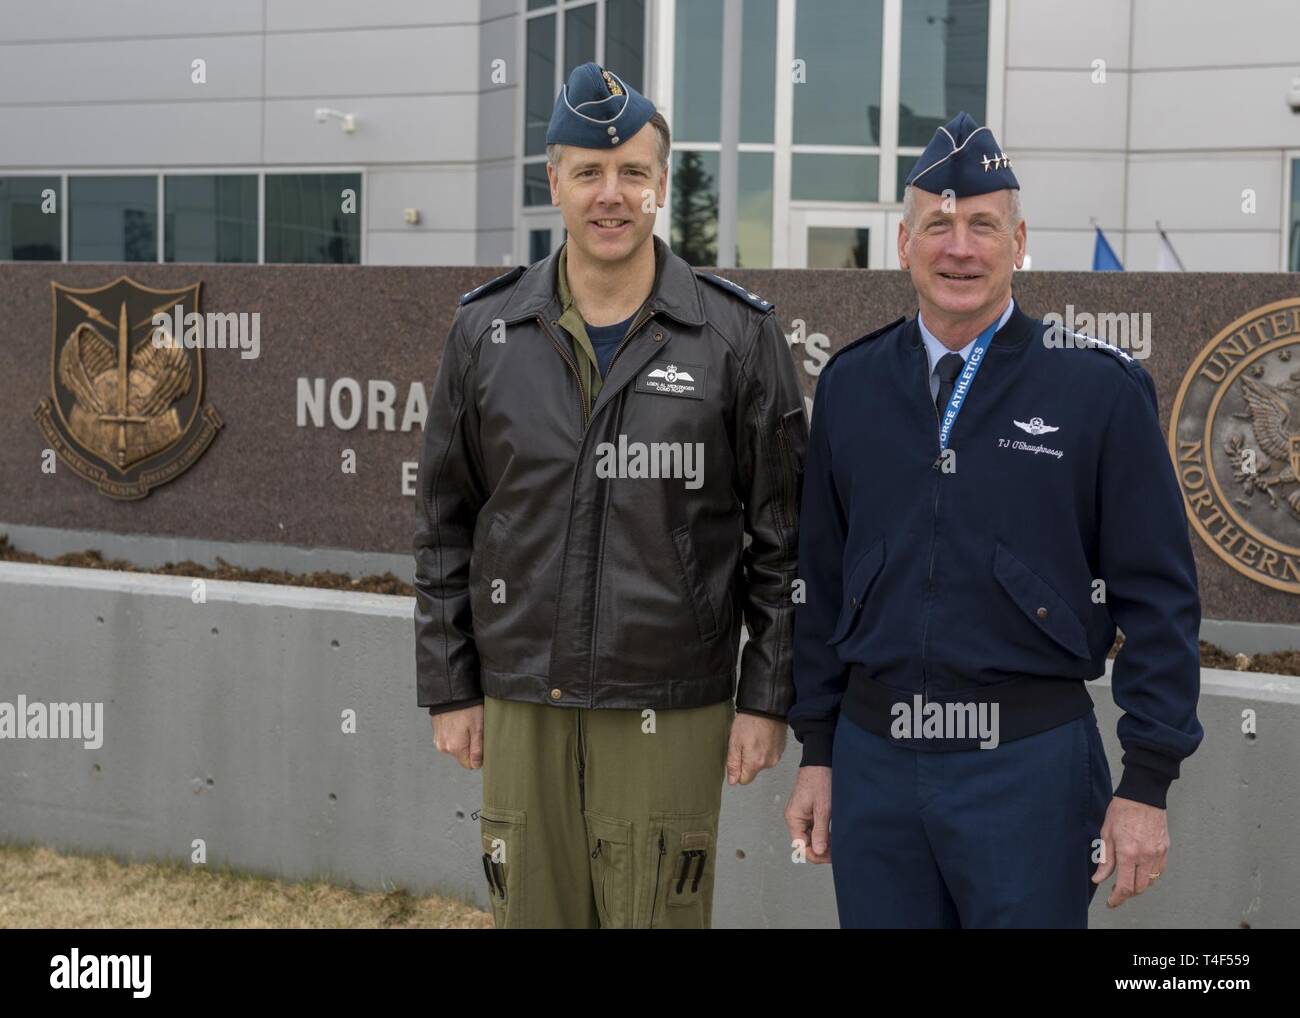 U.S. Air Force Gen. Terrence J. O'Shaughnessy, Commander, North American Aerospace Defense Command and U.S. Northern Command and Royal Canadian Air Force Commander, Lieutenant-General Al Meinzinger stop for a photo in front of the Commands headquarters in Colorado Springs, Colorado, April 9, 2019. Lieutenant-General Meinzinger's visit is to discuss NORAD modernization efforts and the strong relationship between the RCAF and NORAD. Stock Photo